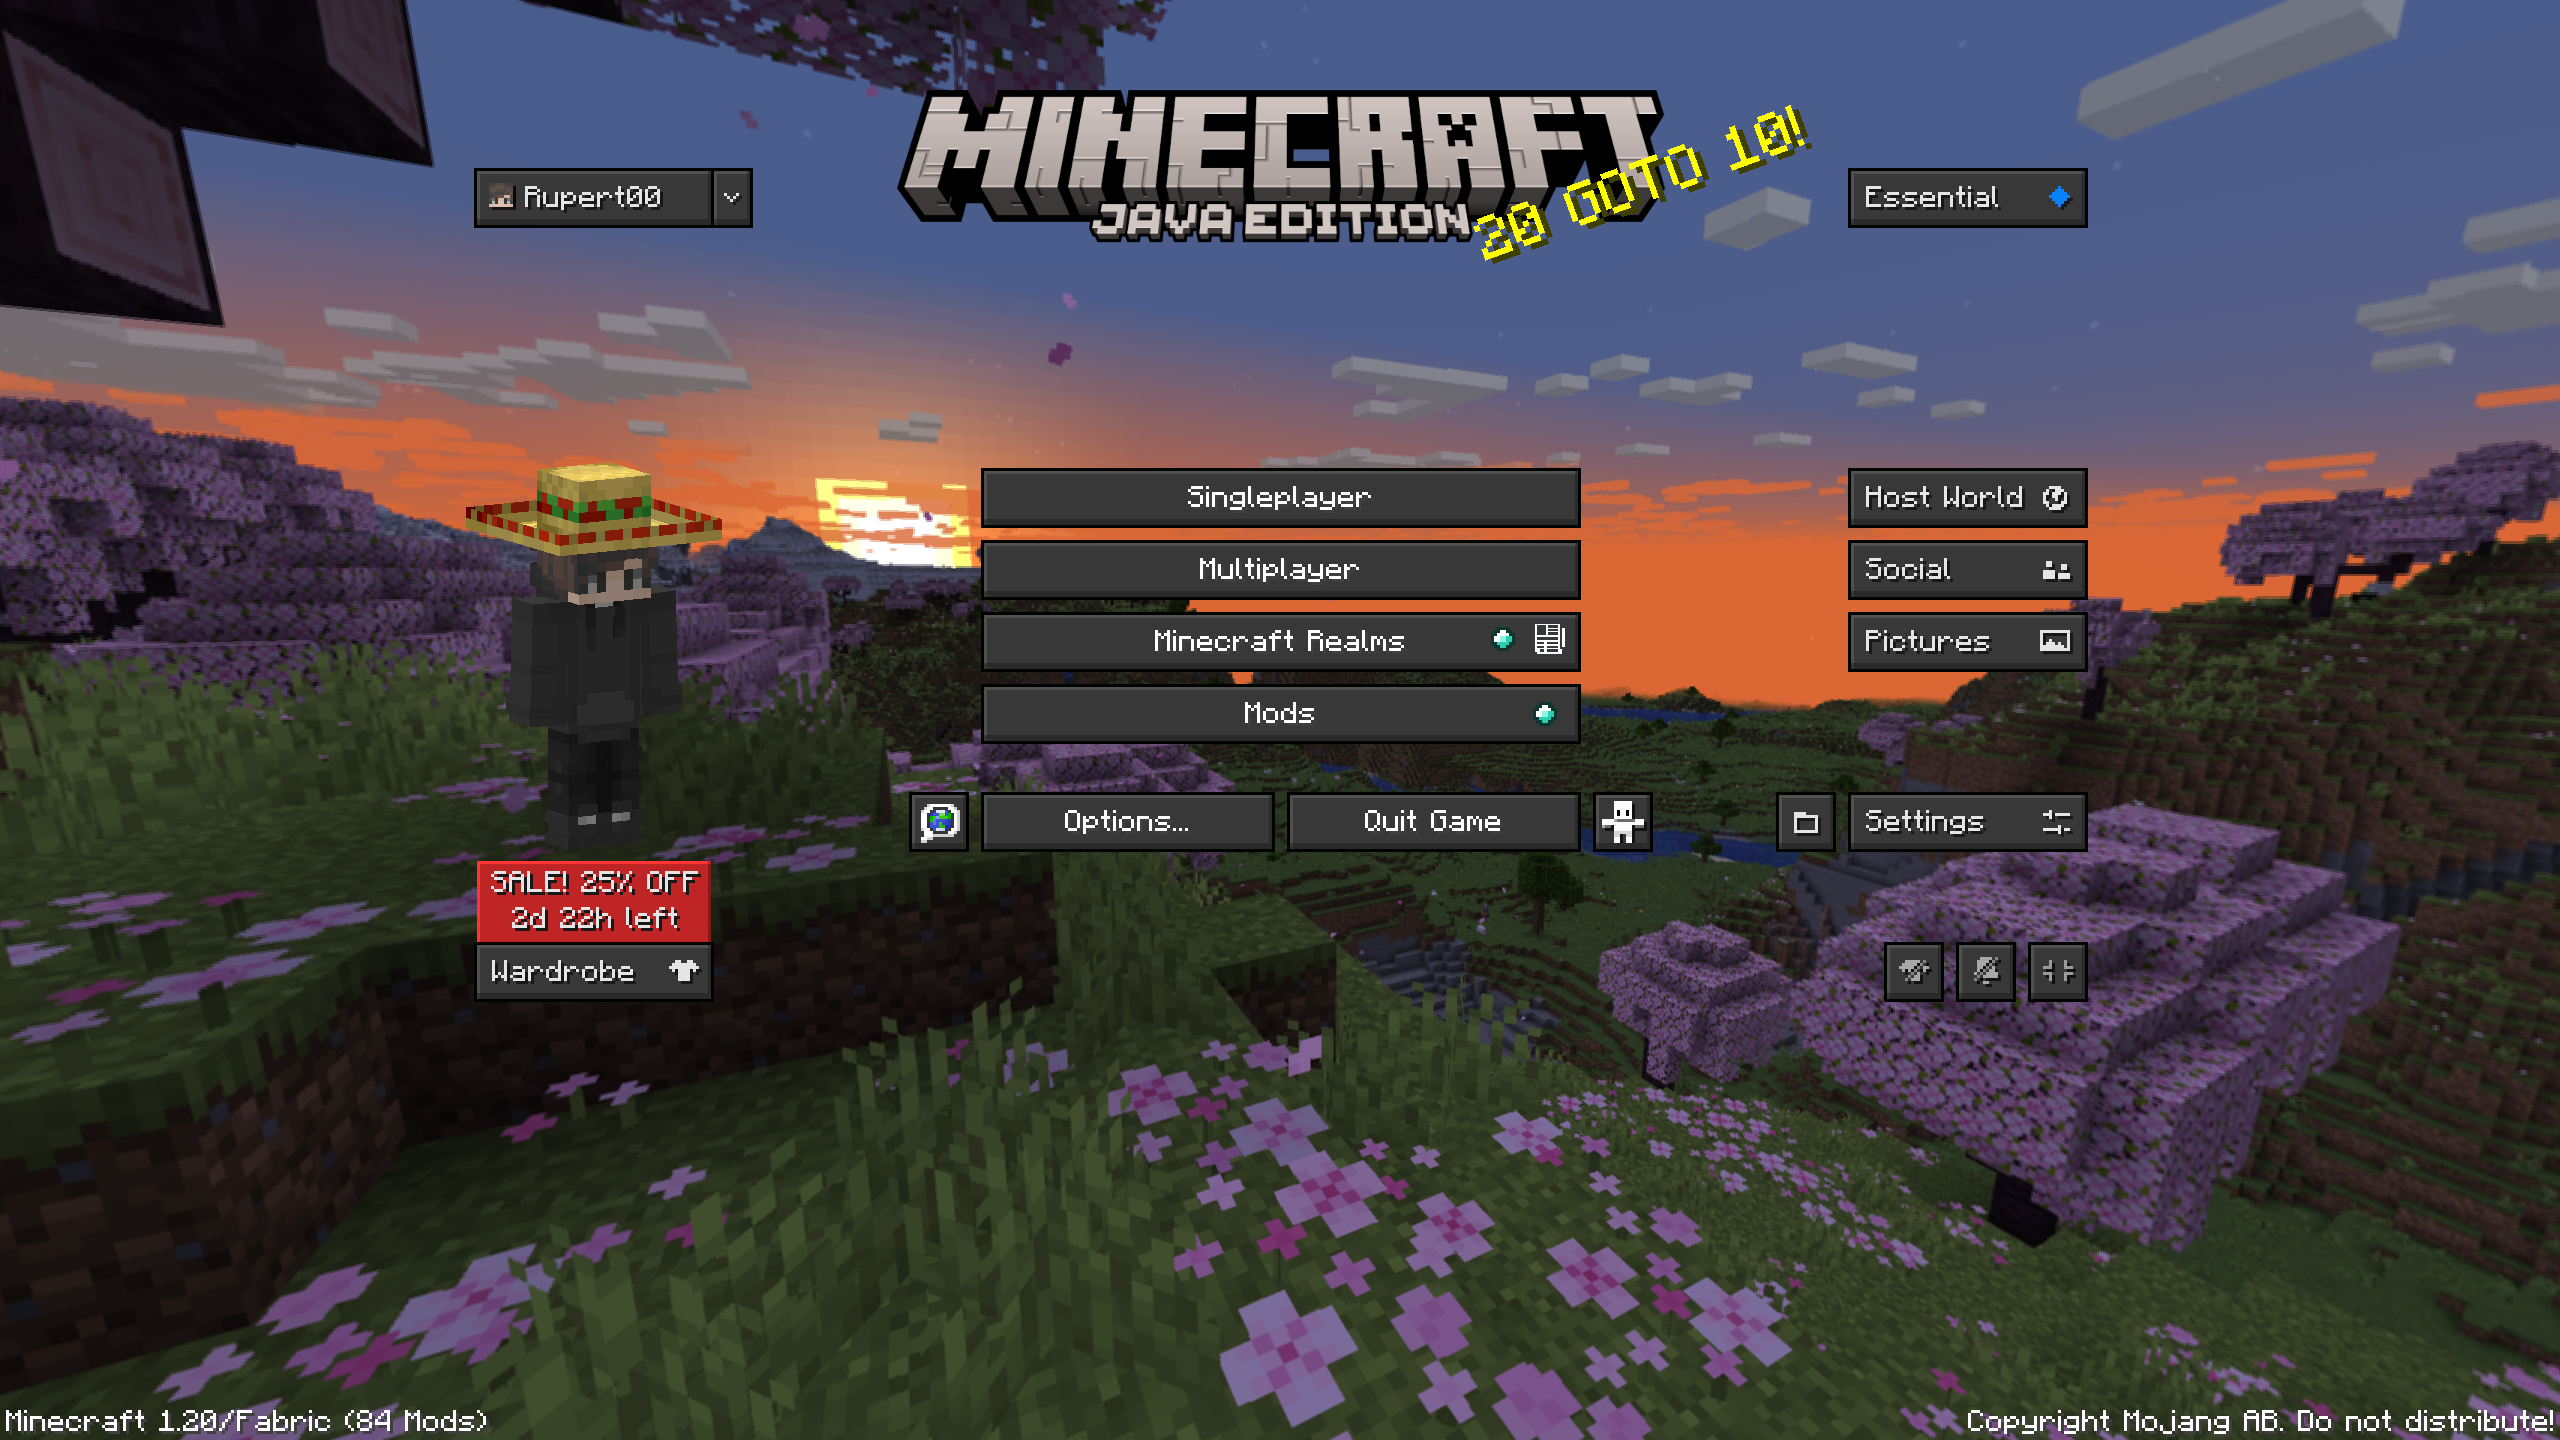 This is how your startmenu in Minecraft 1.20 will look with the Essential mod and the Essential UI texturepack